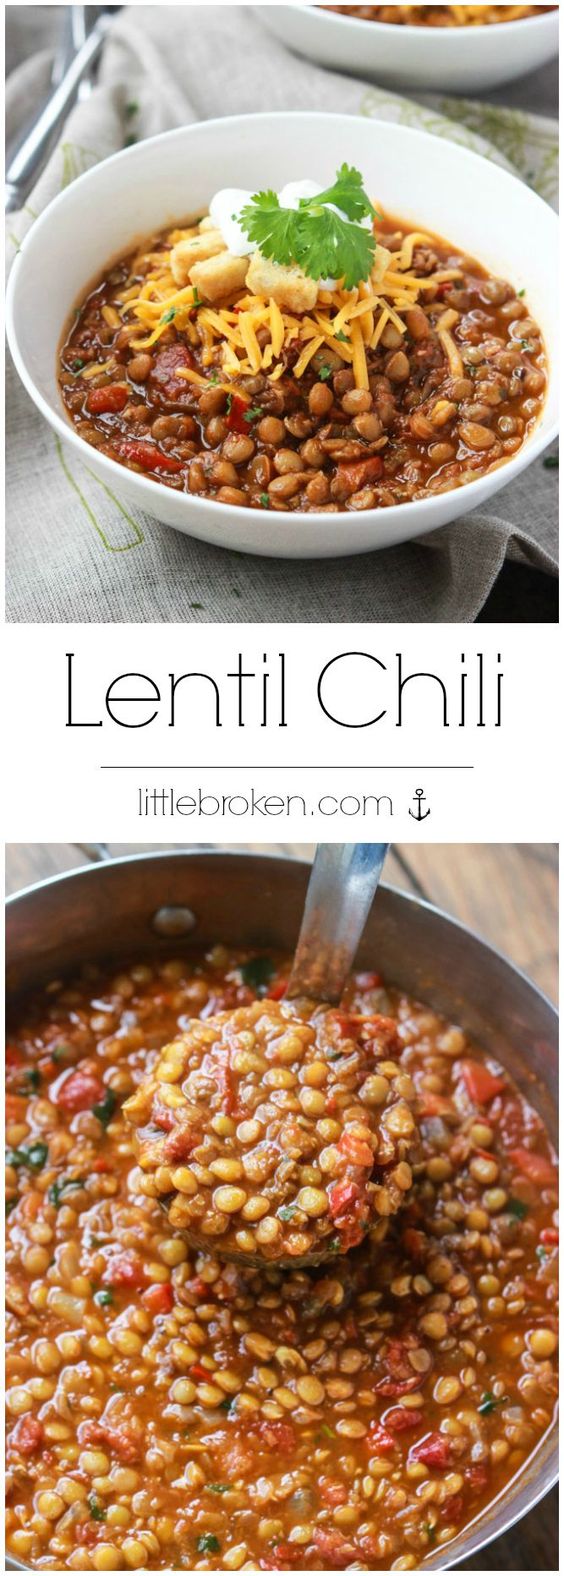 Meatless lentil chili with simple ingredients and flavorful spices. It's wholesome, filling, and makes one easy weeknight meal